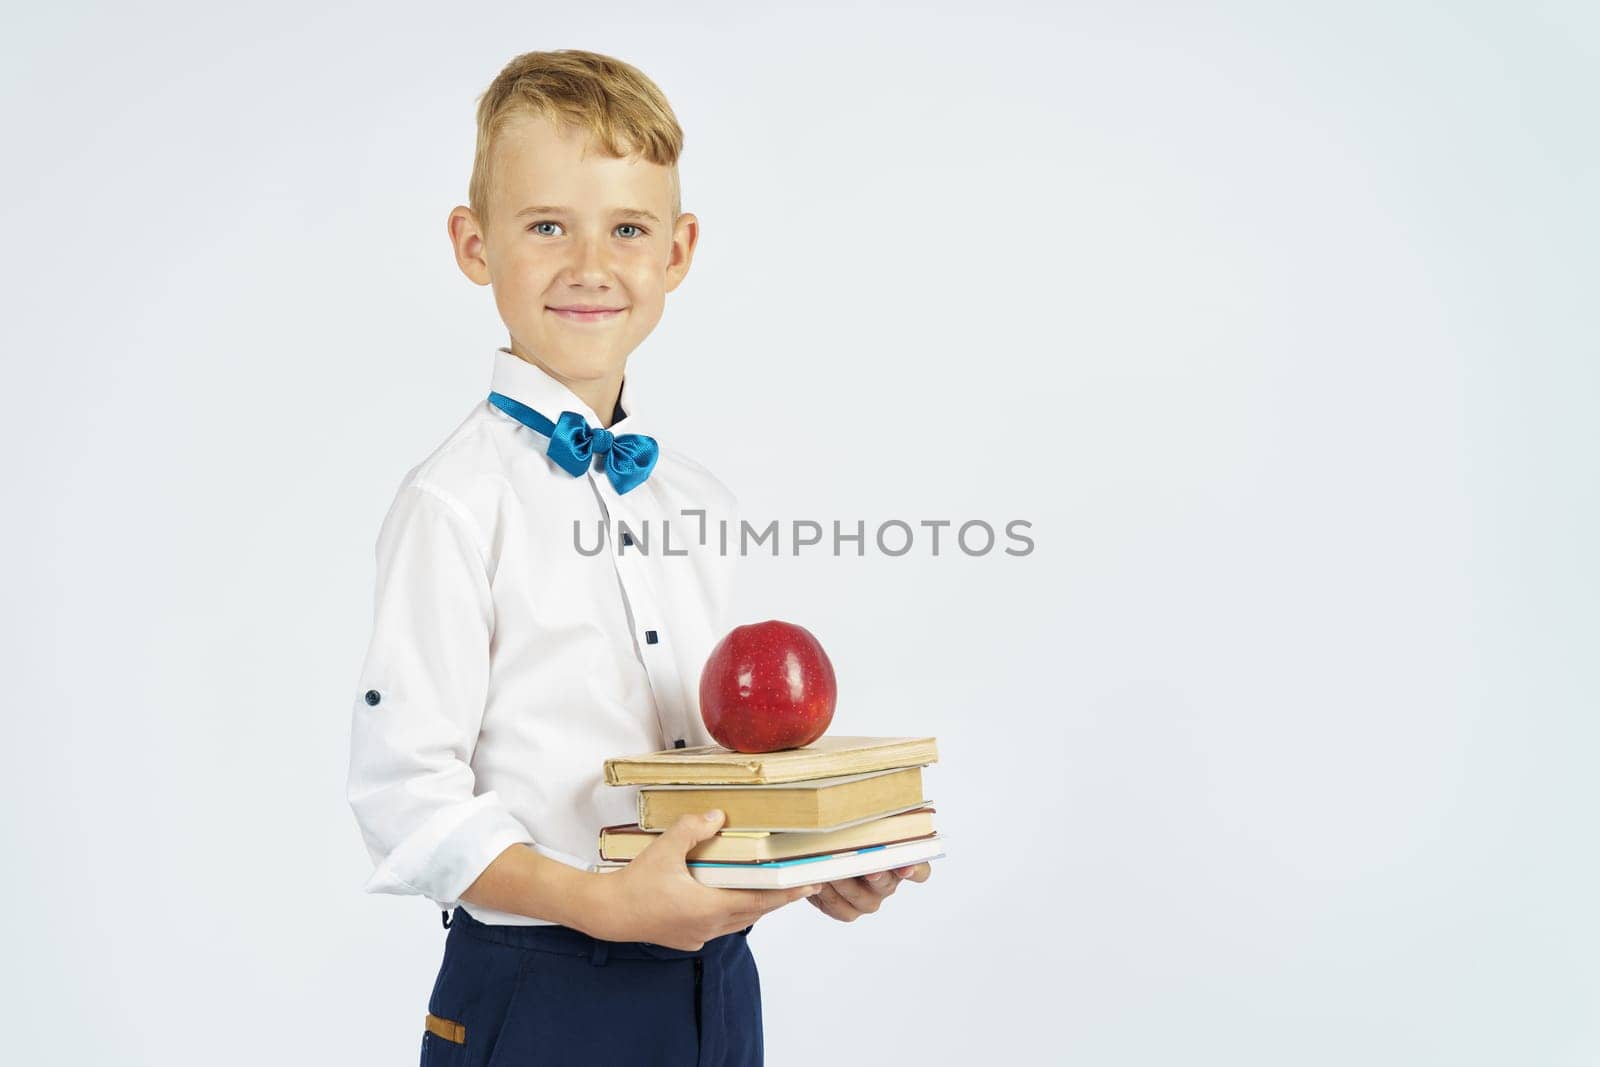 The schoolboy holds books and an apple in his hands. Isolated background. Education concept